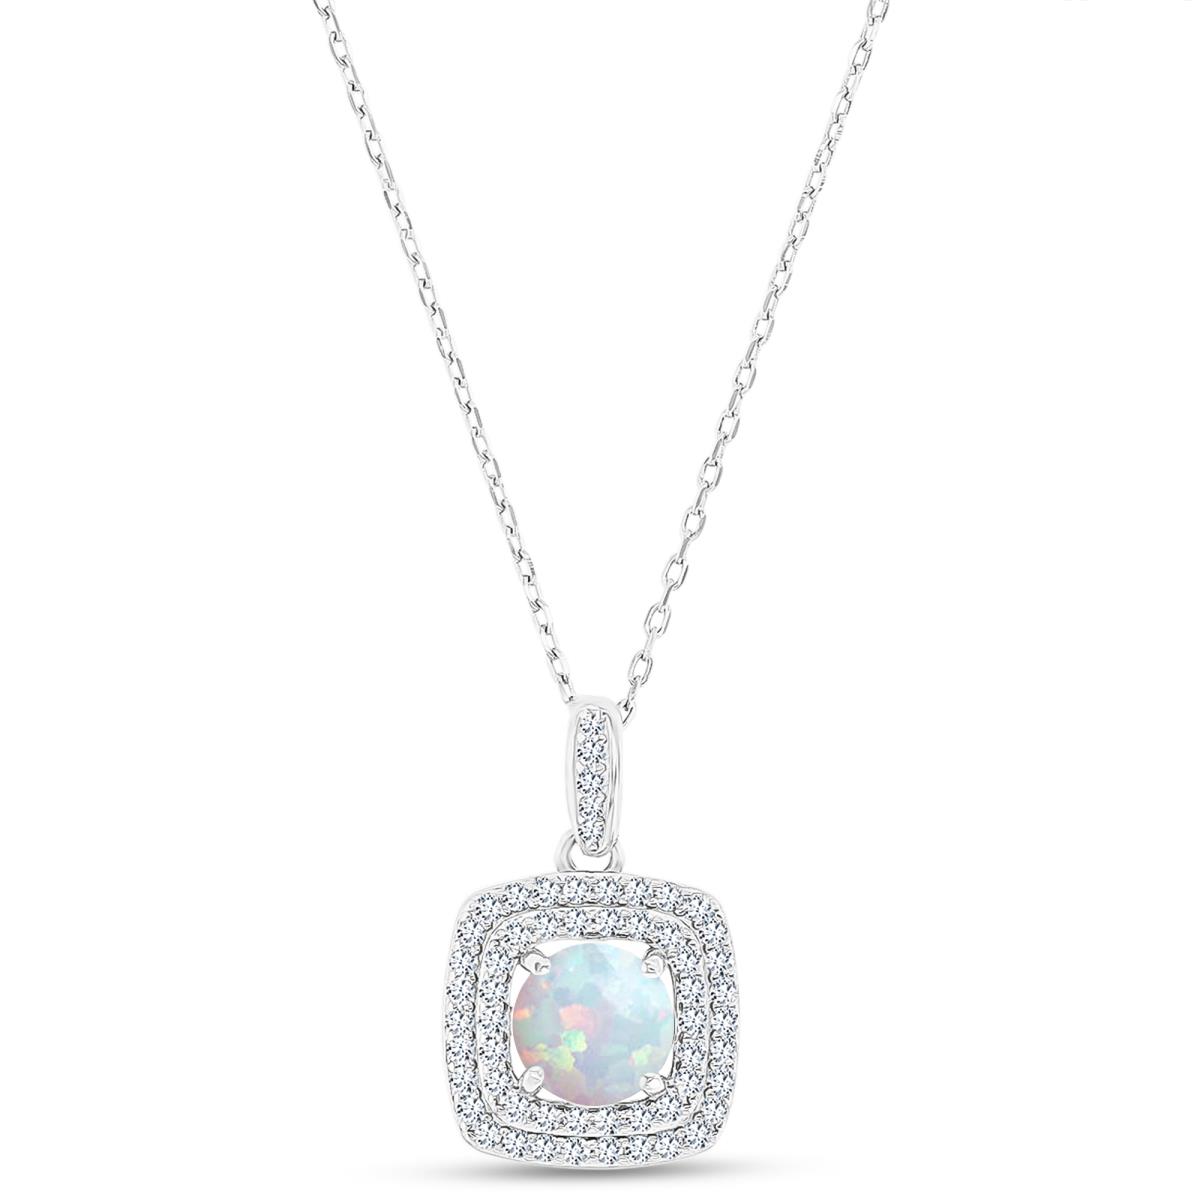 Sterling Silver Rhodium 7mm RD Cr Opal/ Cr White Sapphire Cushion Double Halo 16"+2" Necklace